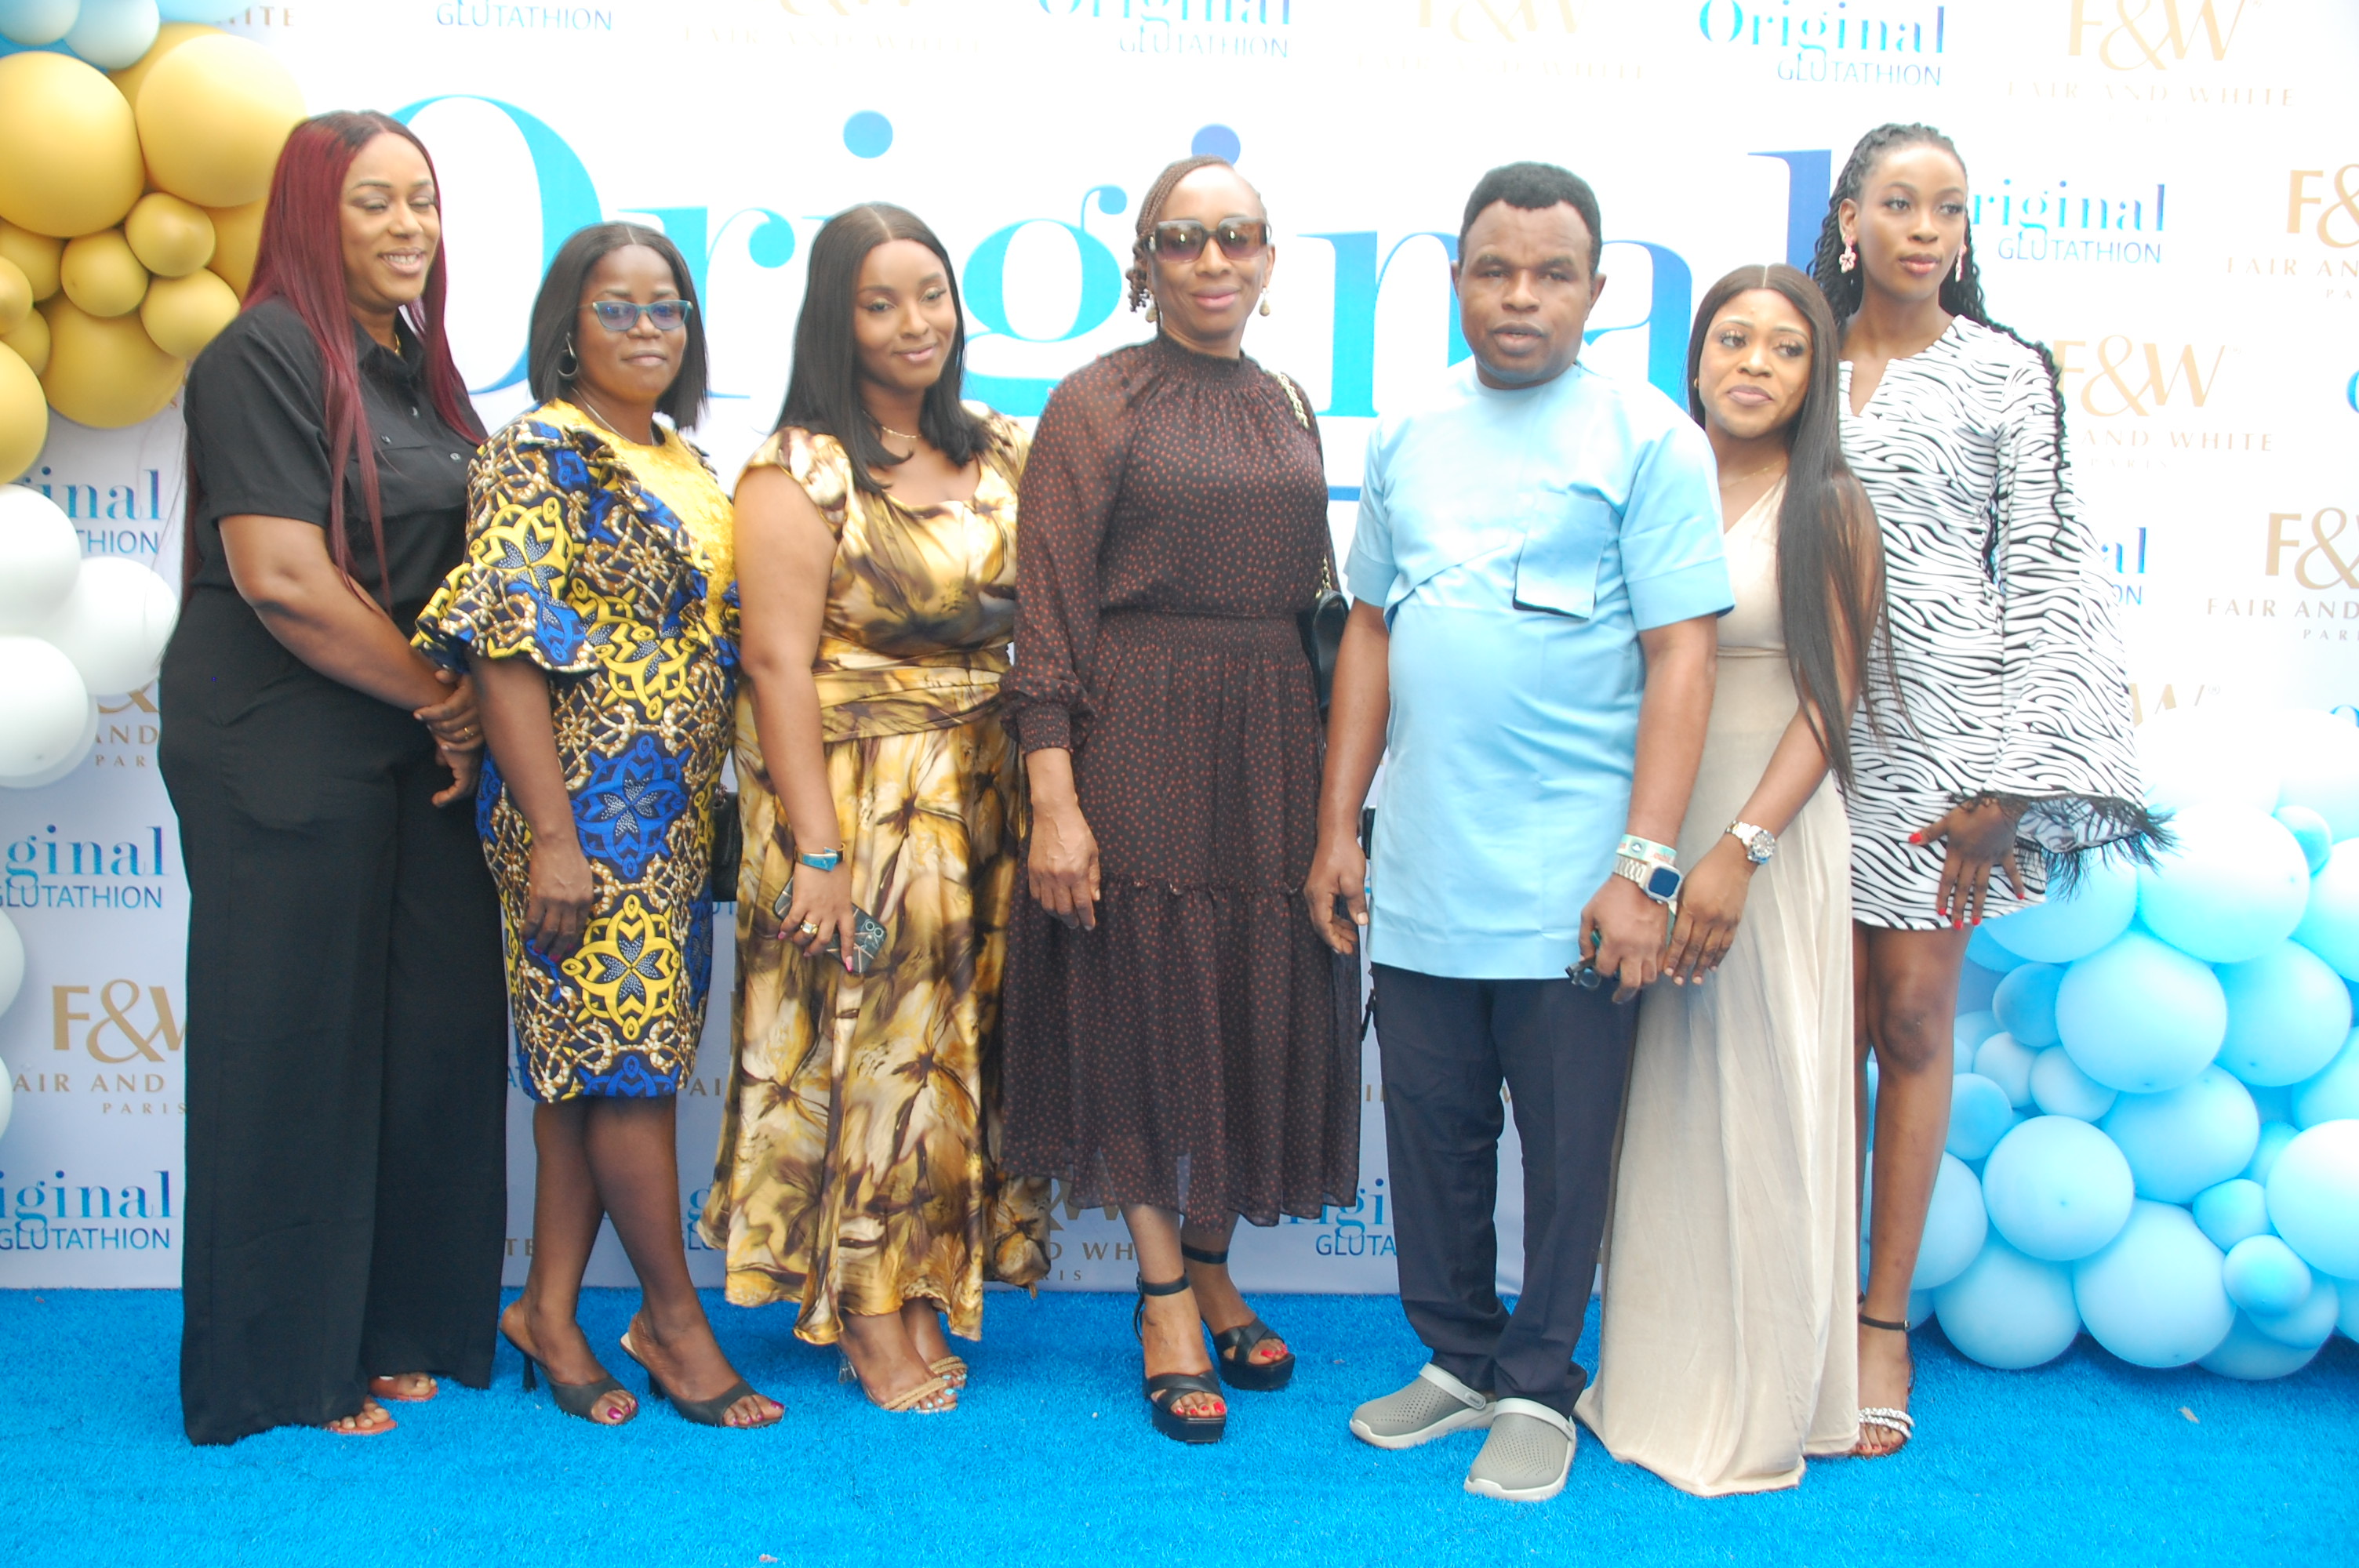 Fair and White Launches New Product Range, Unveils Bbnaija Housemate As Brand Ambassador